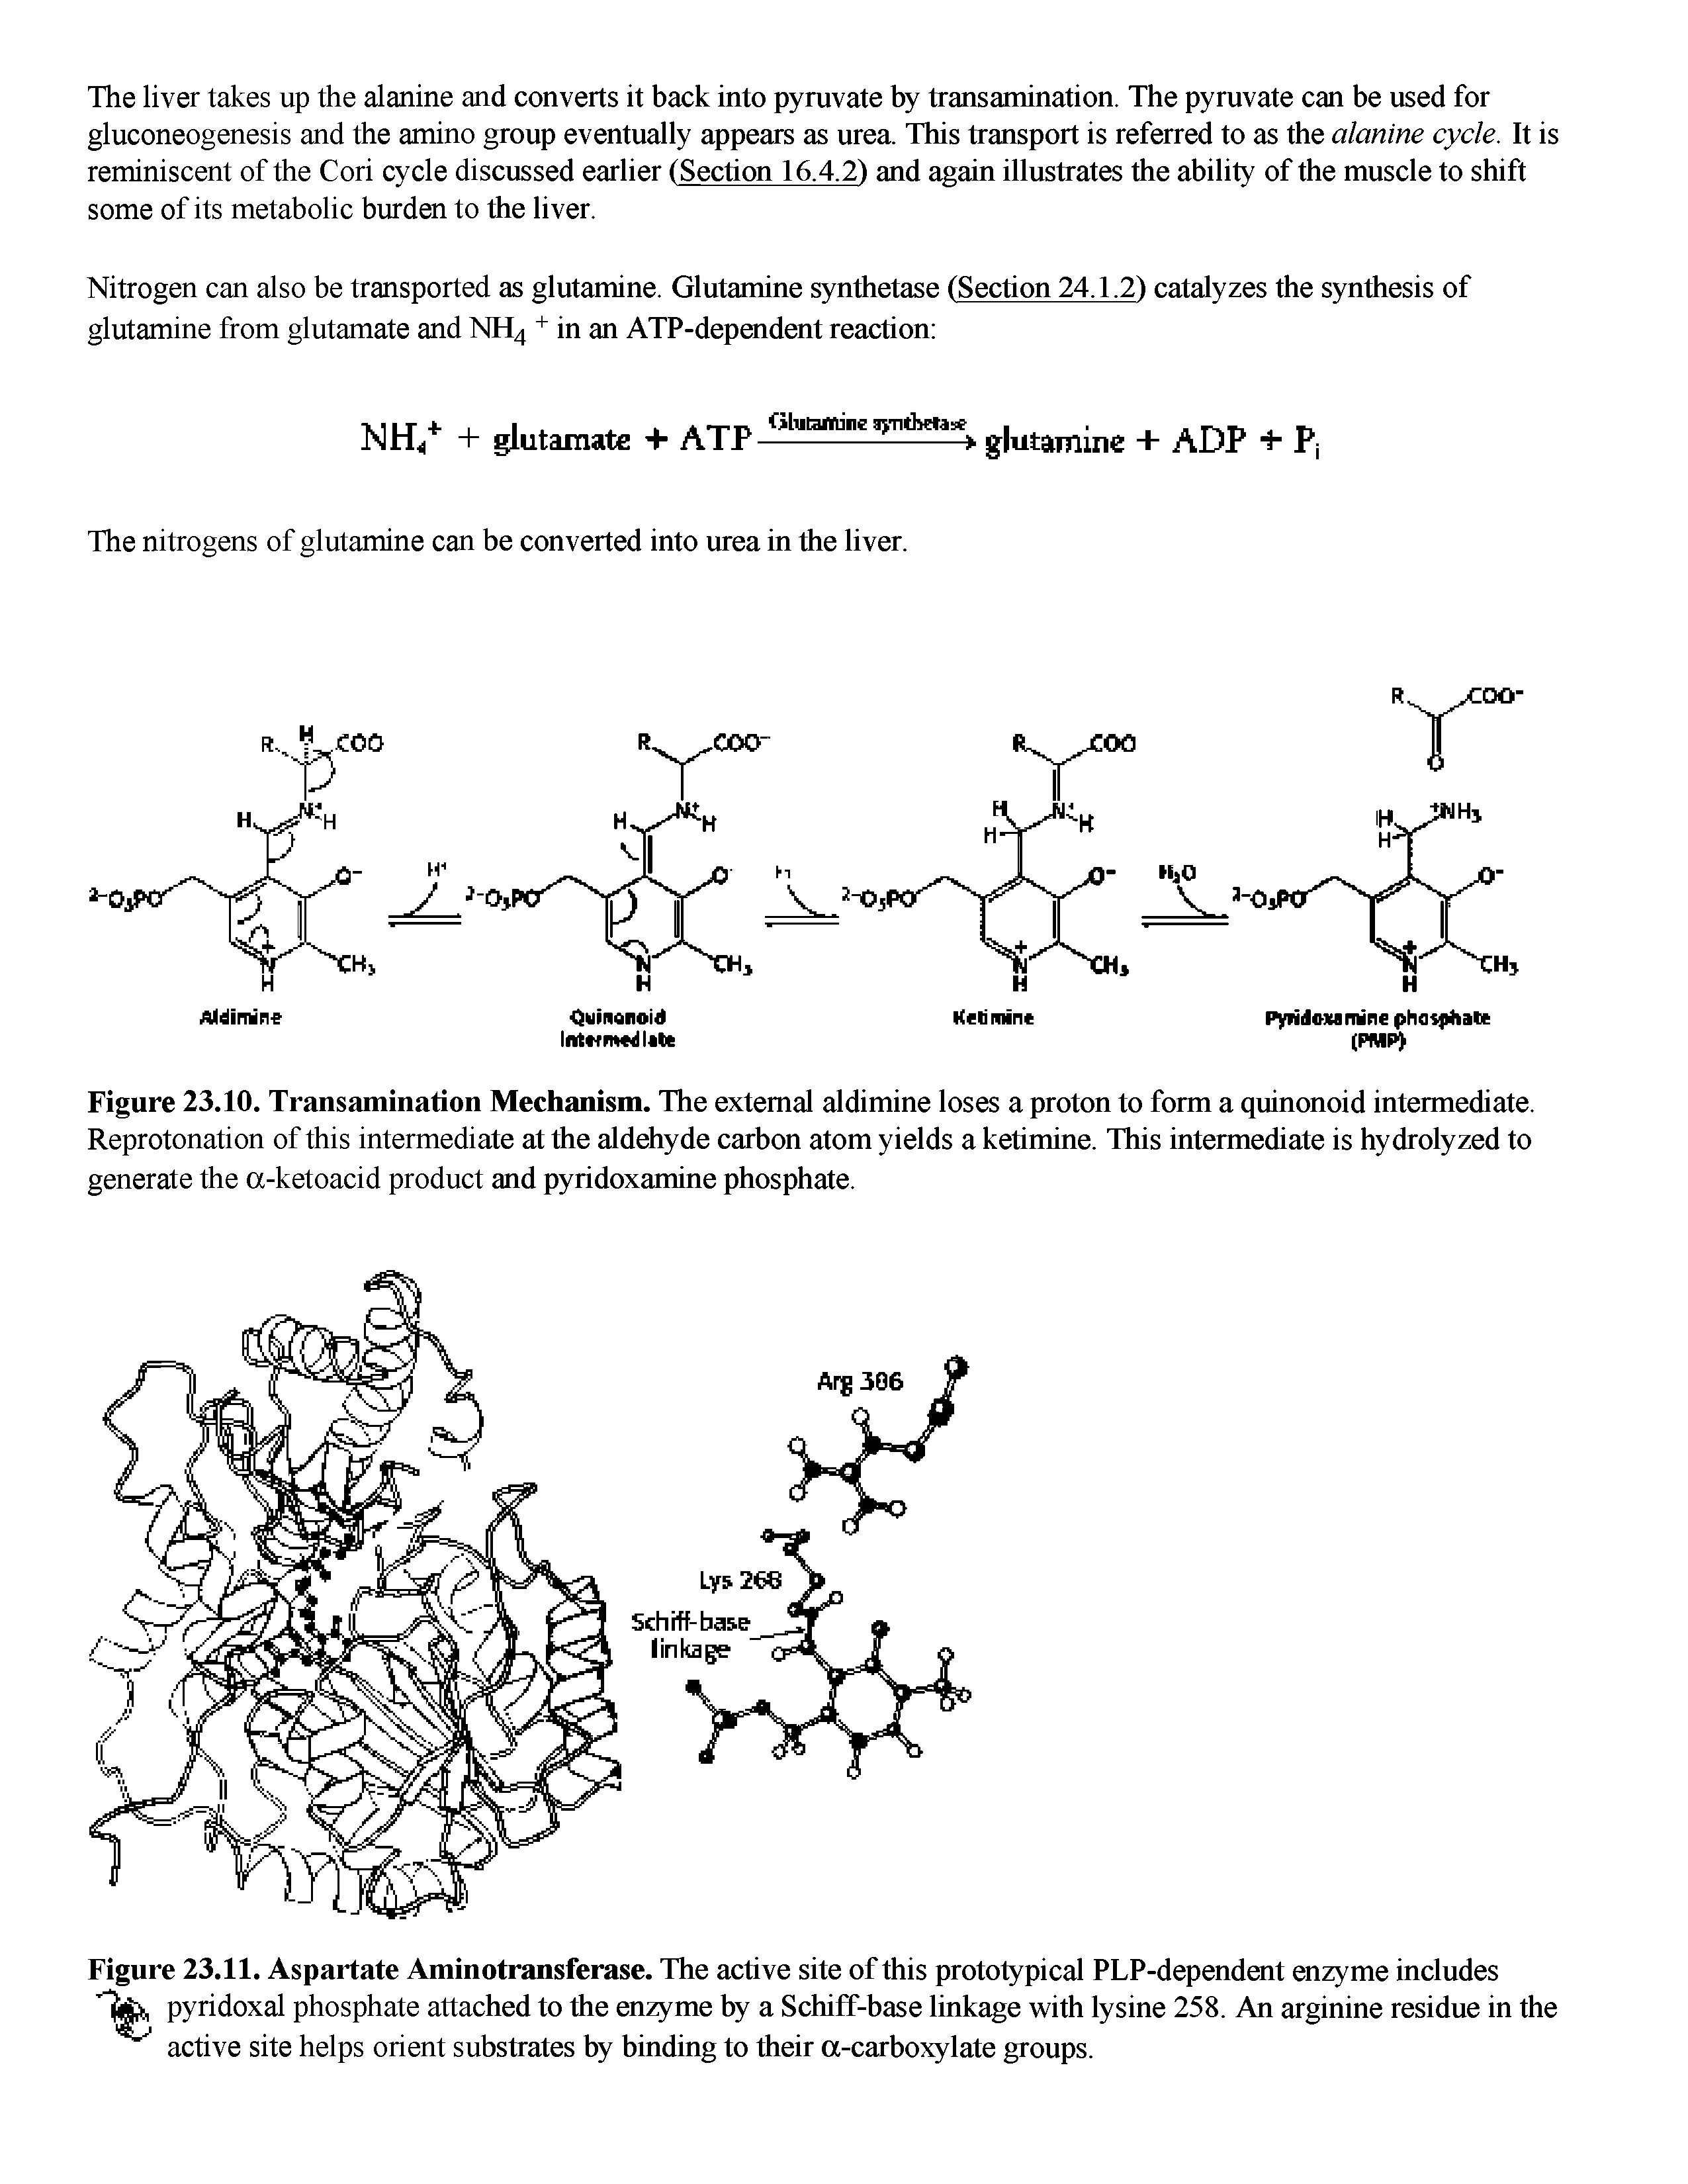 Figure 23.10. Transamination Mechanism. The external aldimine loses a proton to form a quinonoid intermediate. Reprotonation of this intermediate at the aldehyde carbon atom yields a ketimine. This intermediate is hydrolyzed to generate the a-ketoacid product and pyridoxamine phosphate.